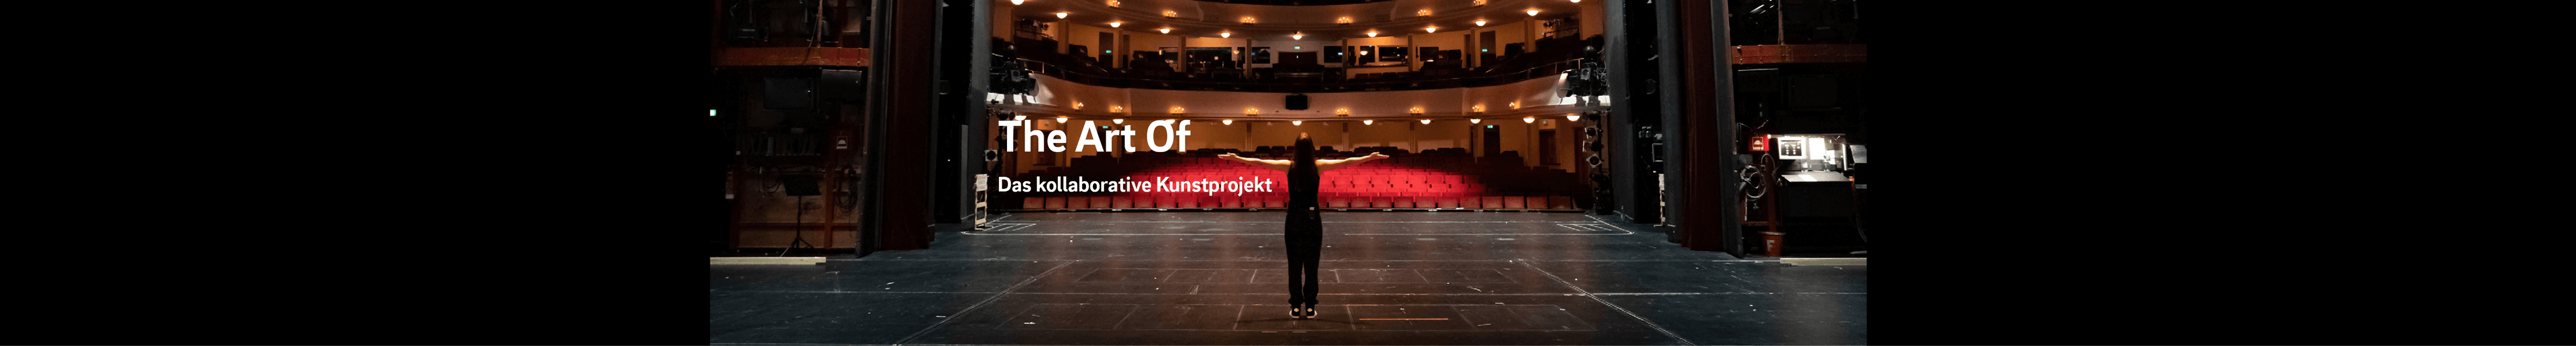 buehne_the-art-of_large